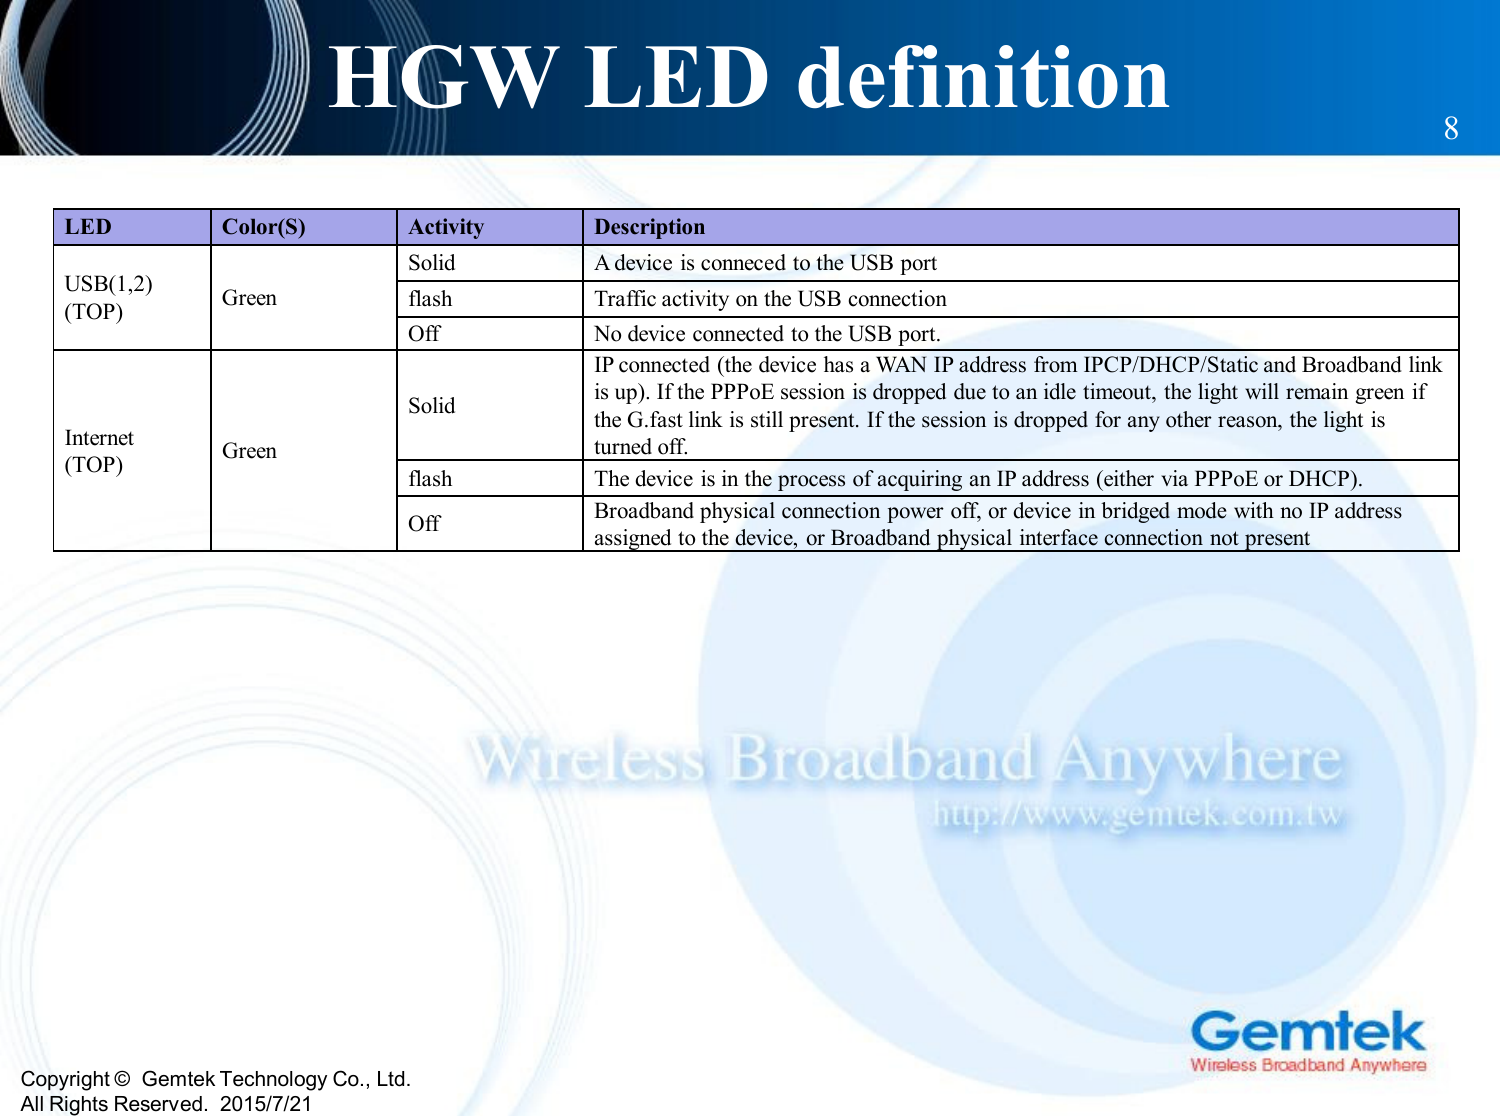 Copyright ©  Gemtek Technology Co., Ltd.All Rights Reserved.  2015/7/21HGW LED definition 8LED Color(S) Activity DescriptionUSB(1,2)(TOP) GreenSolid  A device is conneced to the USB portflash Traffic activity on the USB connectionOff No device connected to the USB port.Internet(TOP) GreenSolidIP connected (the device has a WAN IP address from IPCP/DHCP/Static and Broadband link is up). If the PPPoE session is dropped due to an idle timeout, the light will remain green if the G.fast link is still present. If the session is dropped for any other reason, the light is turned off.flash The device is in the process of acquiring an IP address (either via PPPoE or DHCP).Off Broadband physical connection power off, or device in bridged mode with no IP address assigned to the device, or Broadband physical interface connection not present